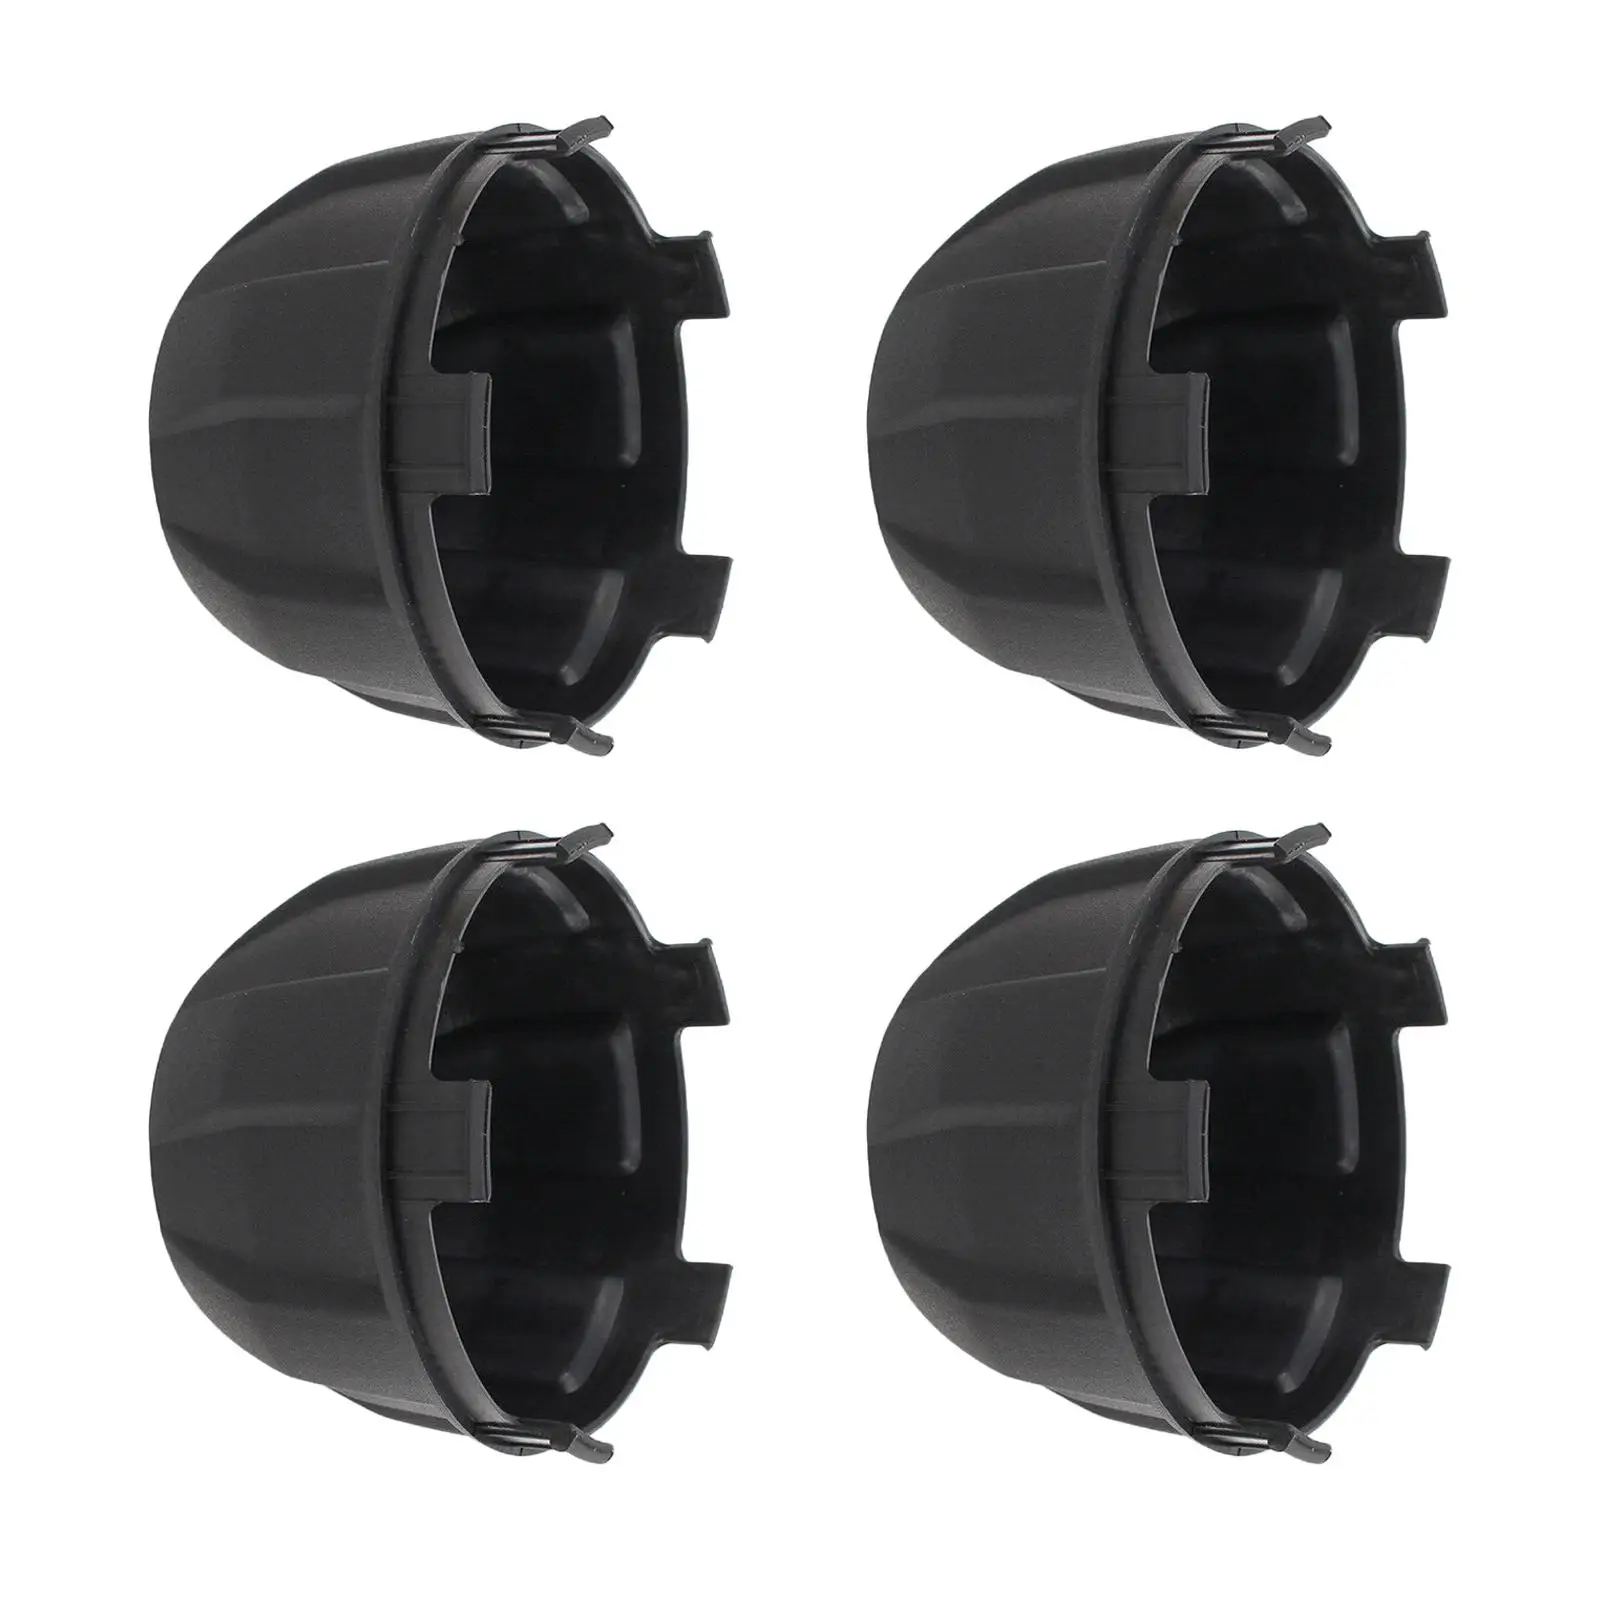 4x Tire Wheel Hub Caps Assembly Motorcycle Black Cap Cover 11065-1341 for Teryx